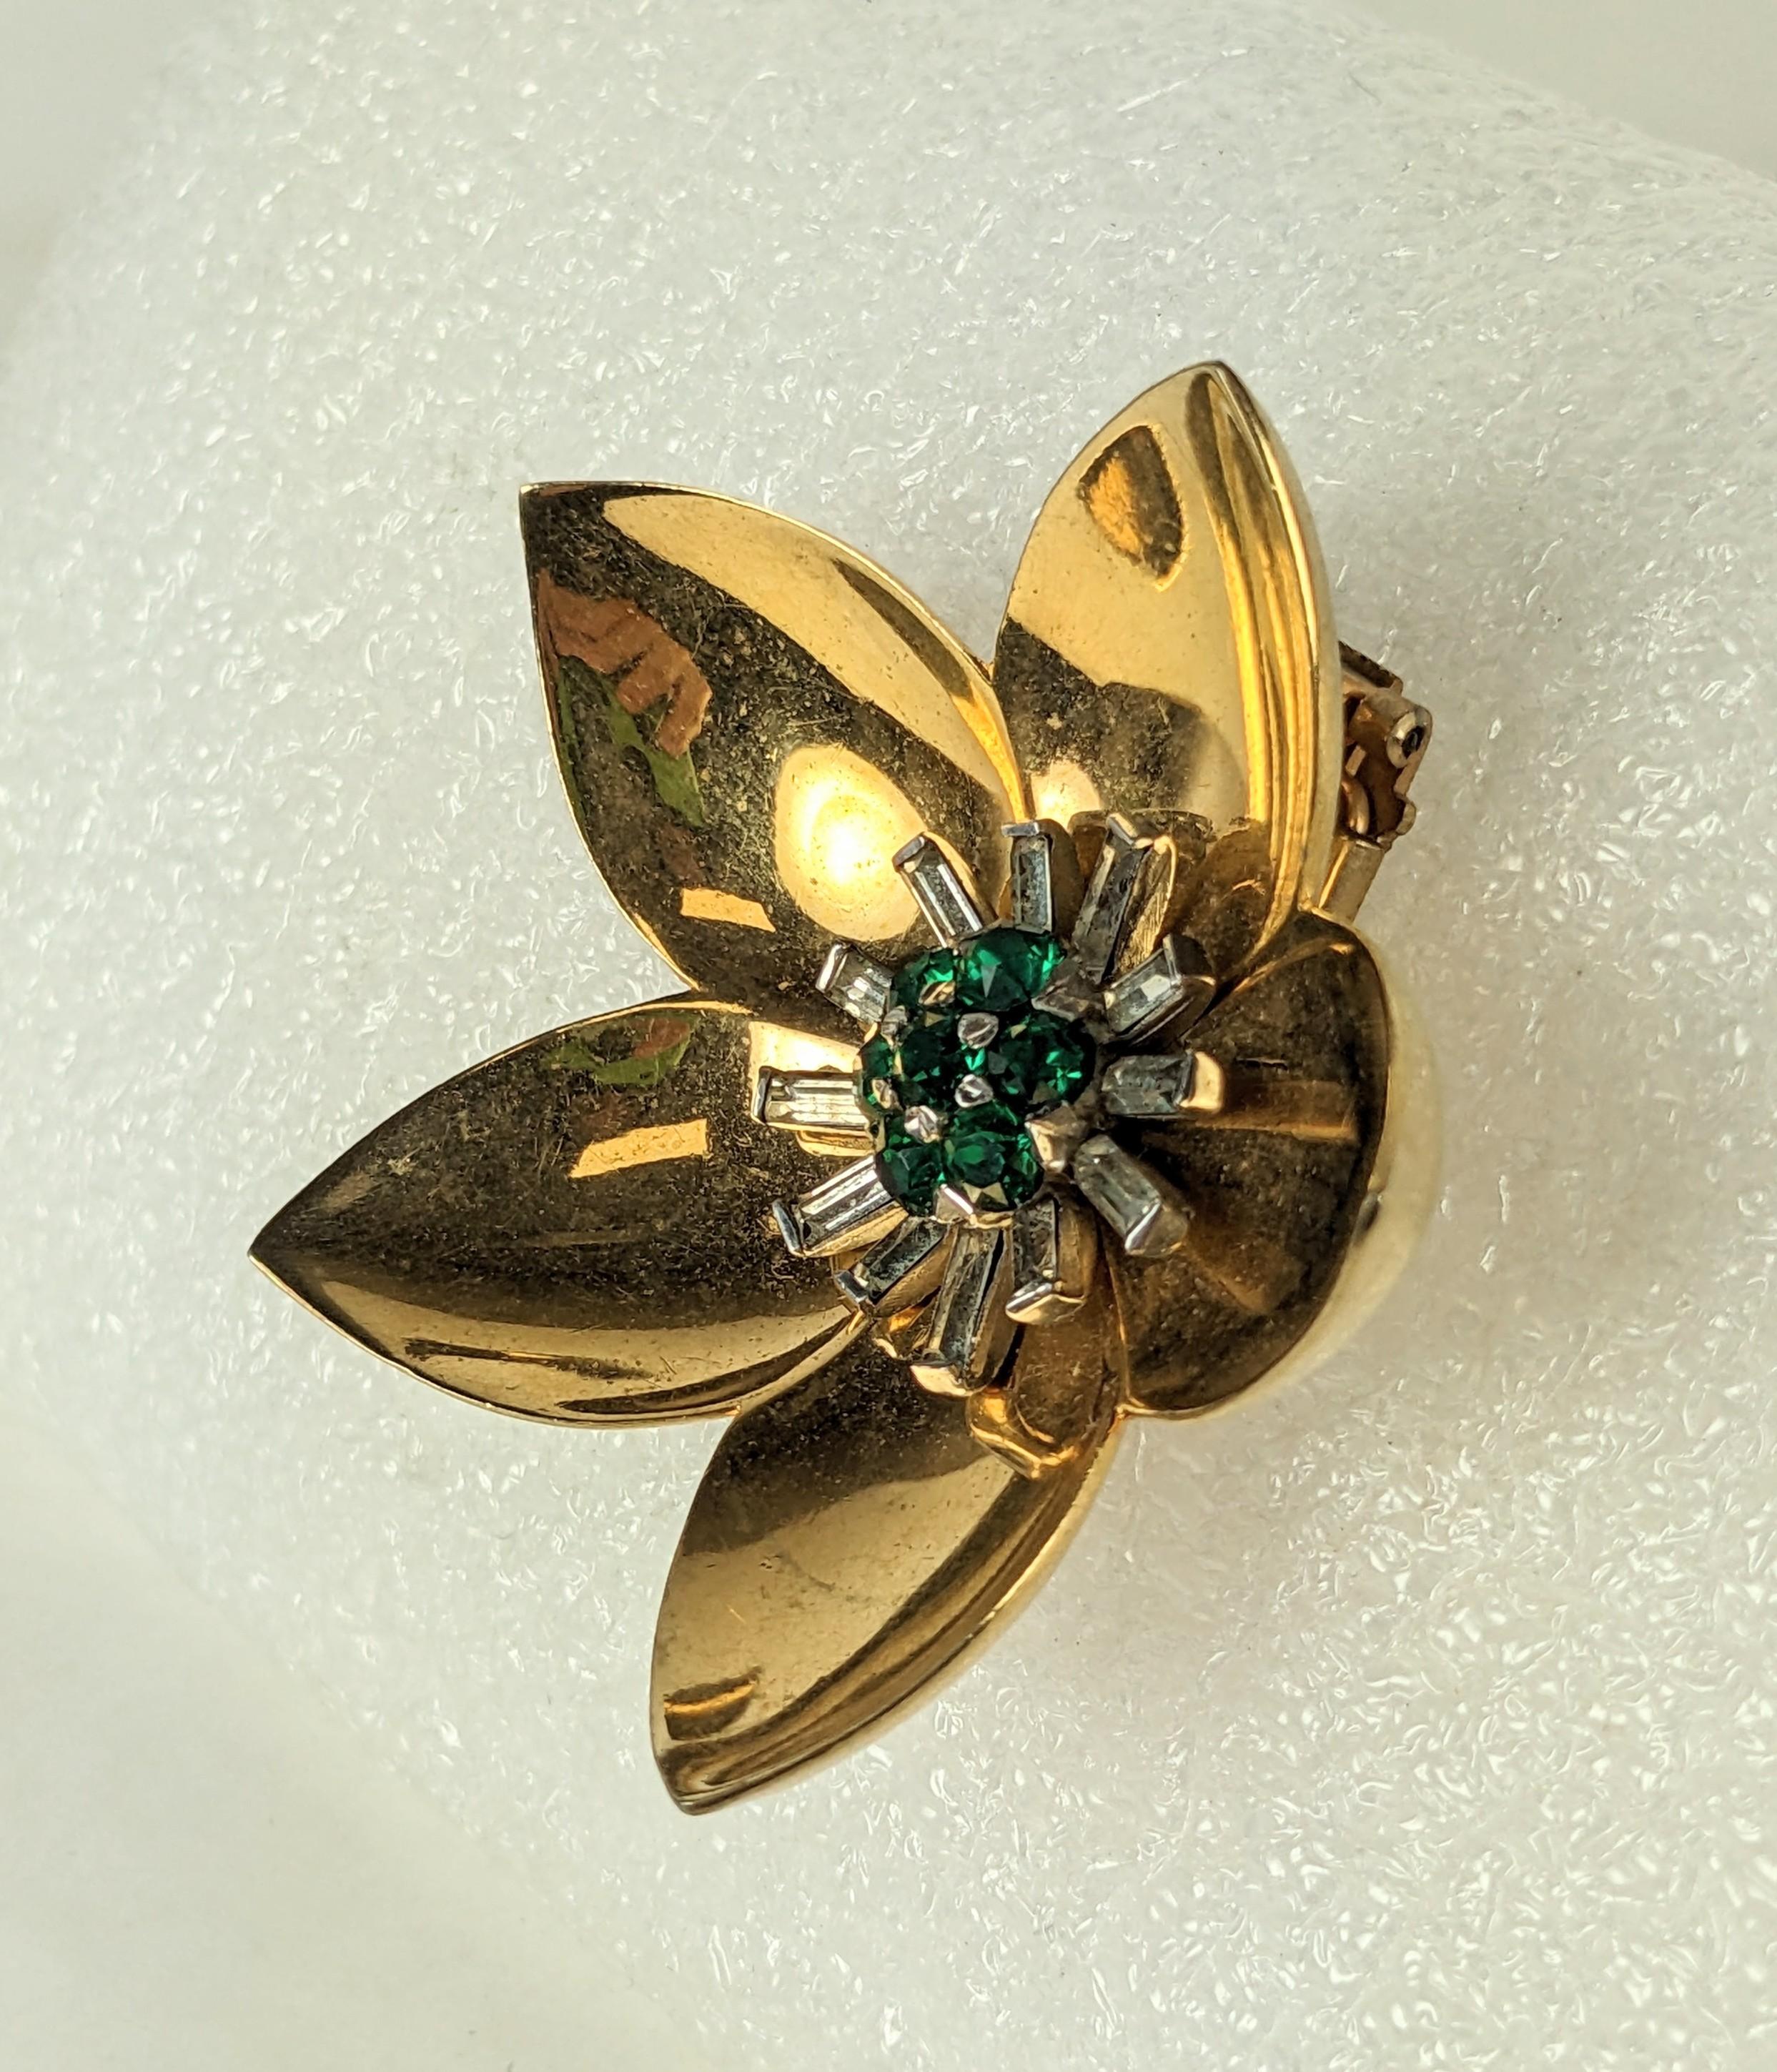 Mazer Retro Lotus Flower Clip from the 1940's. Dimensional cupped design which has a mirror effect when worn. Central cluster of emerald pastes and crystal baguettes. Clip back fittings, Signed Mazer. 2